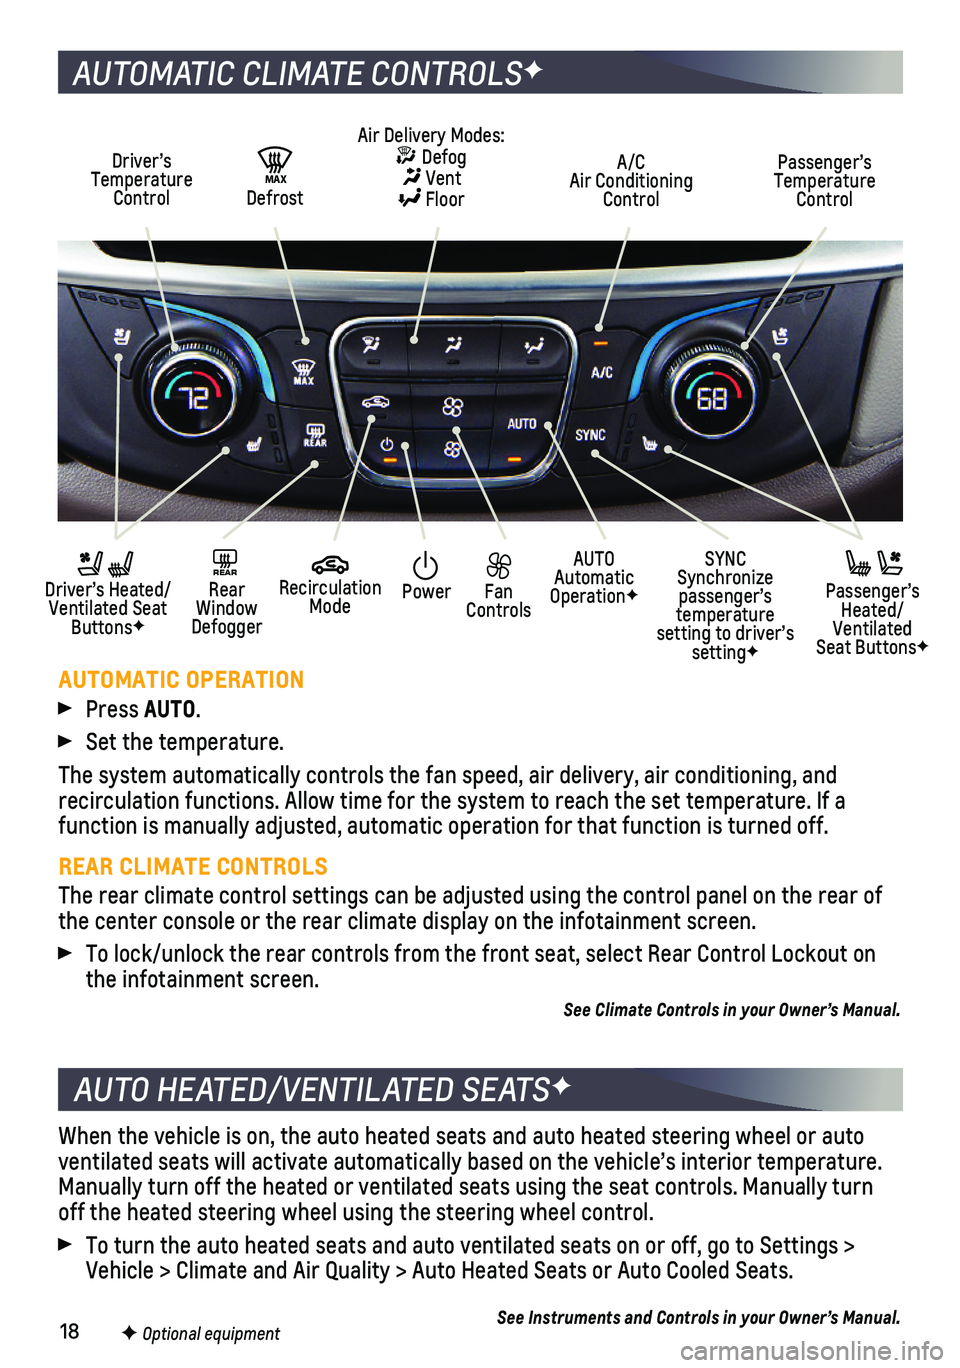 CHEVROLET TRAVERSE 2021  Get To Know Guide 18
When the vehicle is on, the auto heated seats and auto heated steering w\
heel or auto ventilated seats will activate automatically based on the vehicle’s i\
nterior temperature. Manually turn of